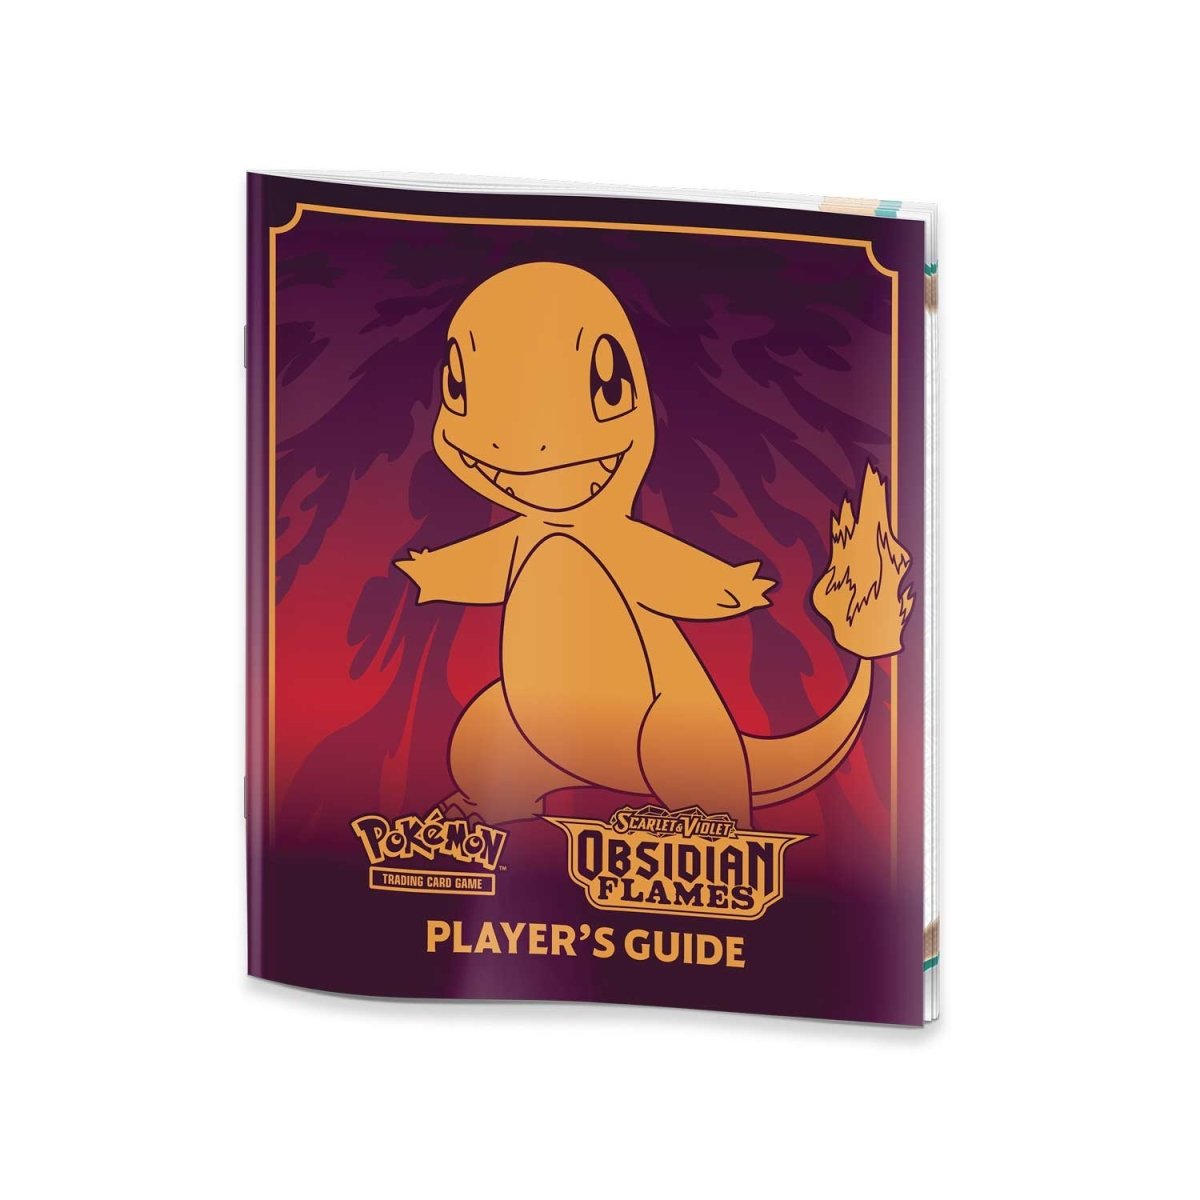 Image showing the included player guide. The Player guide shows Charmander on the front of it.